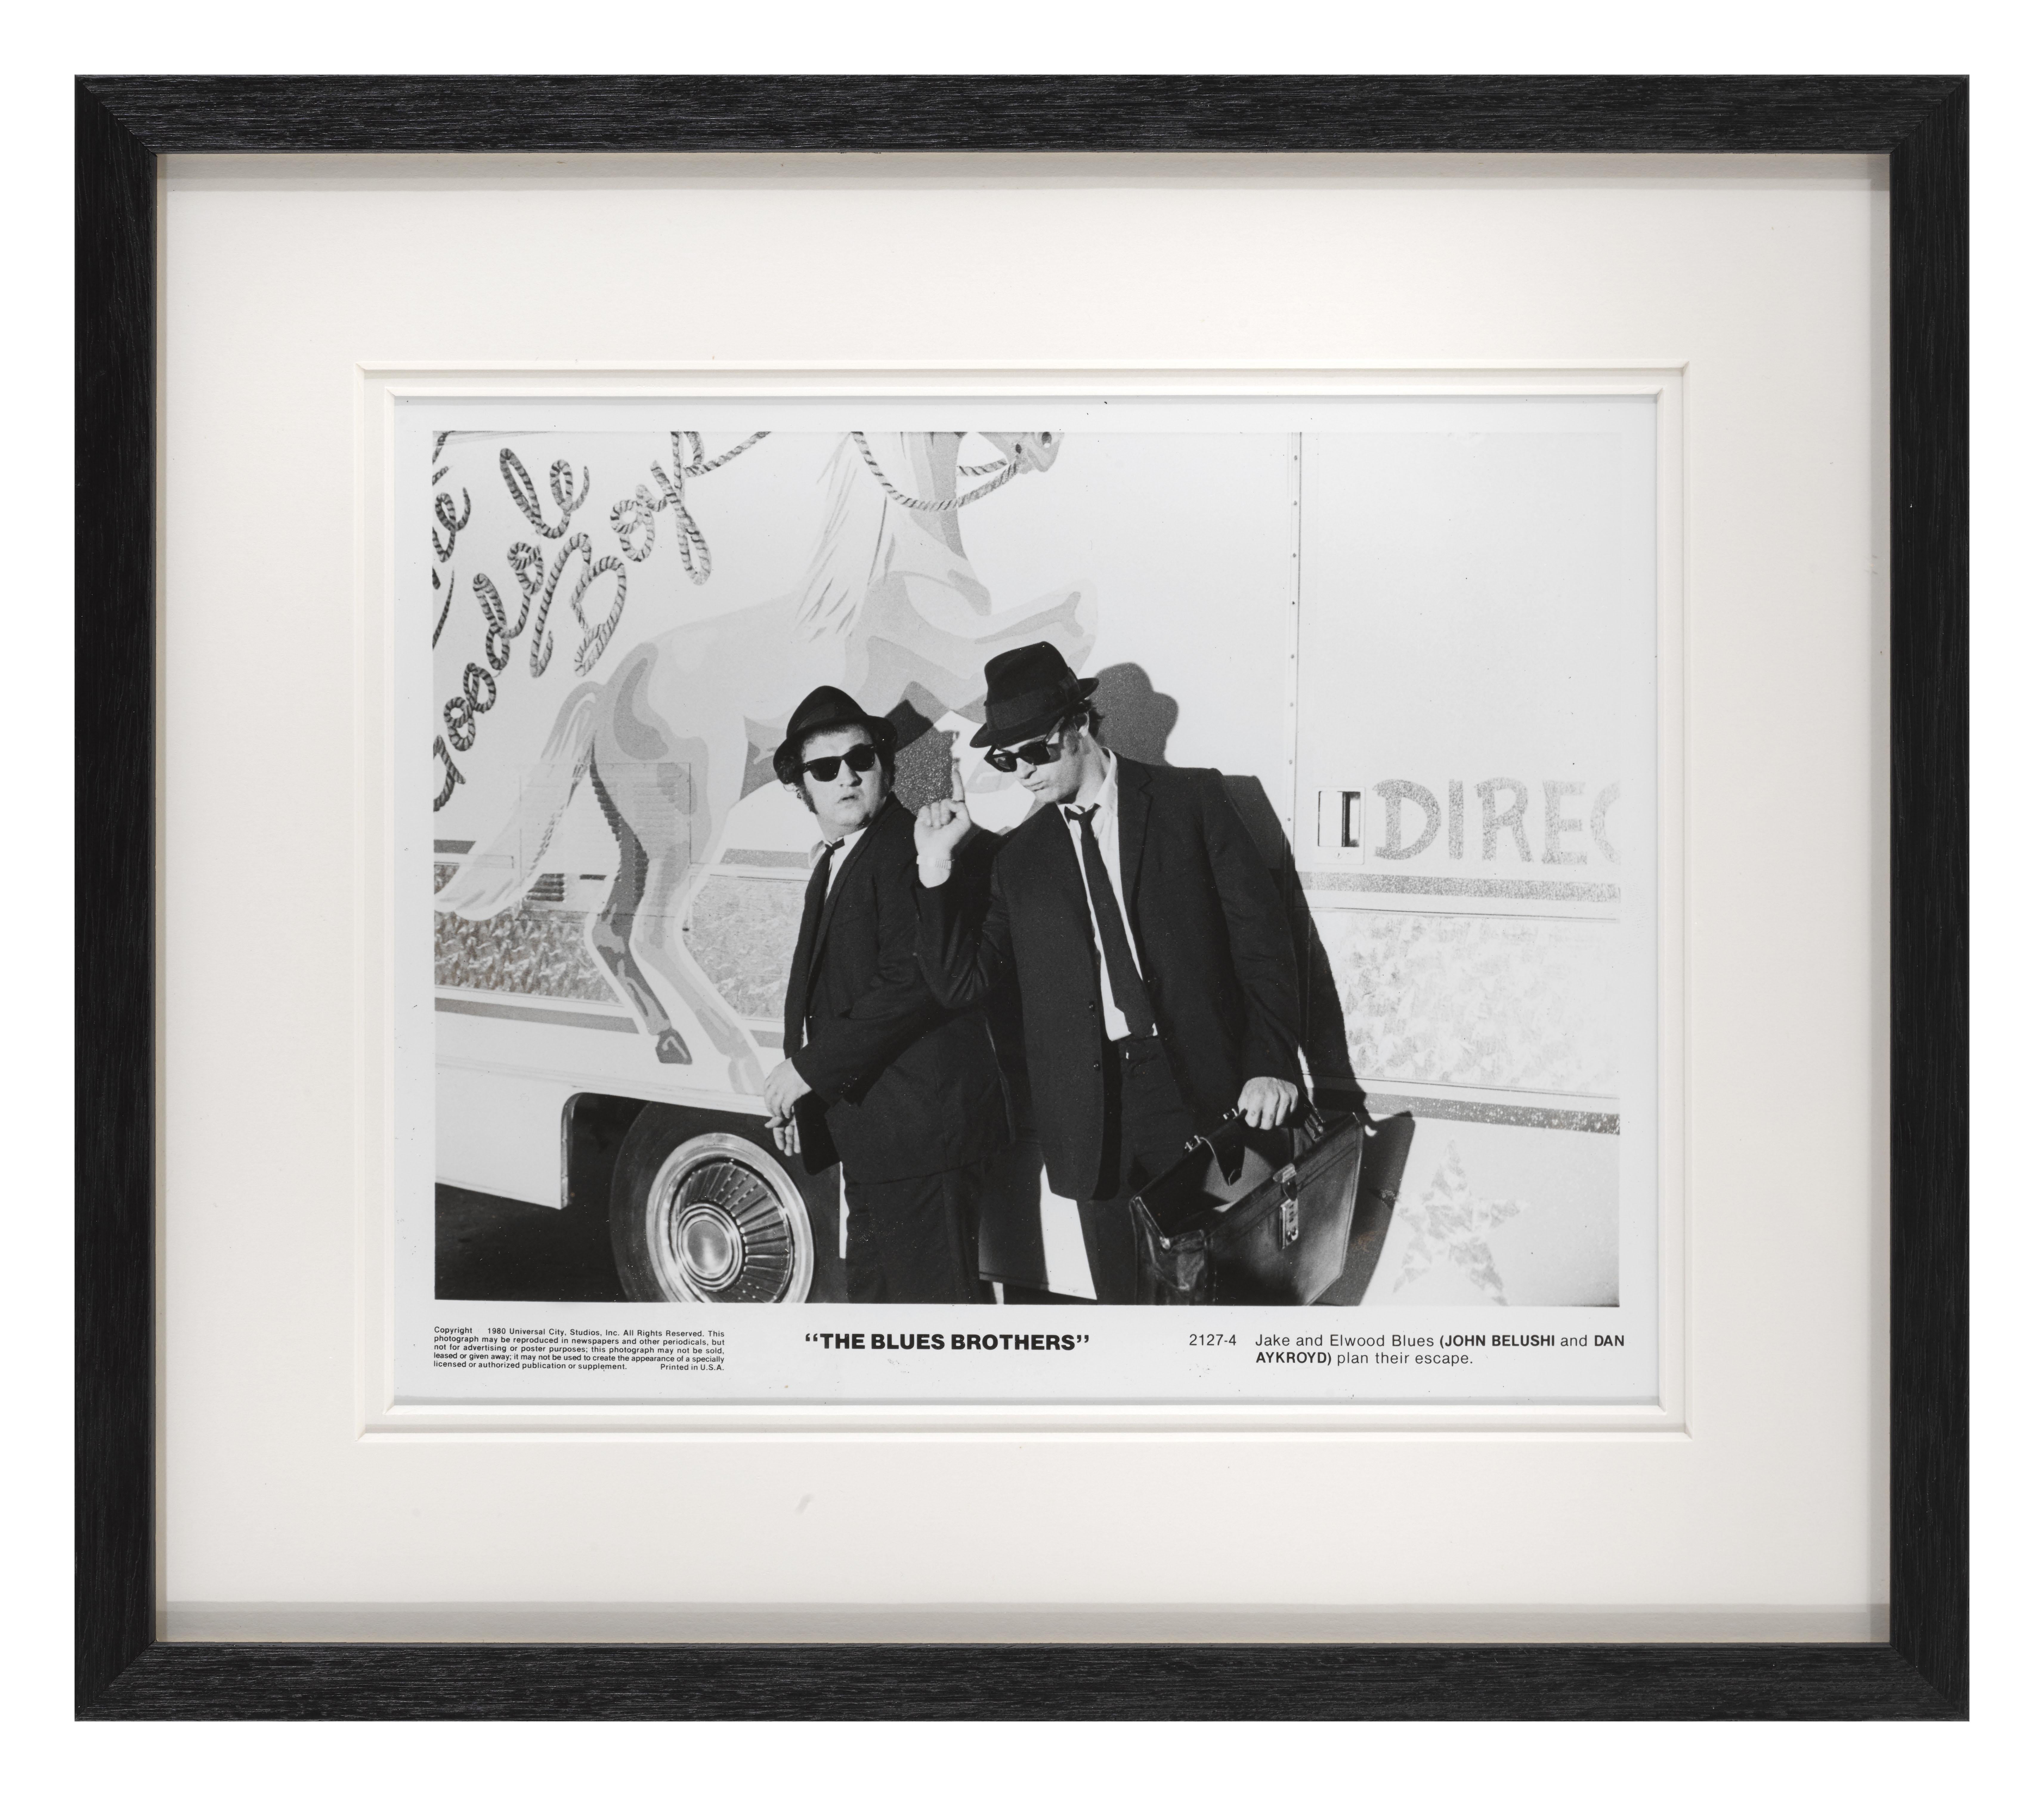 Original US black and white Production Still used by the studio to advertise the film. these stills were sent out to news papers. This piece shows John Belushi, Dan Akroyd playing Jake and Elwood Blues in this cult Classic directed by John